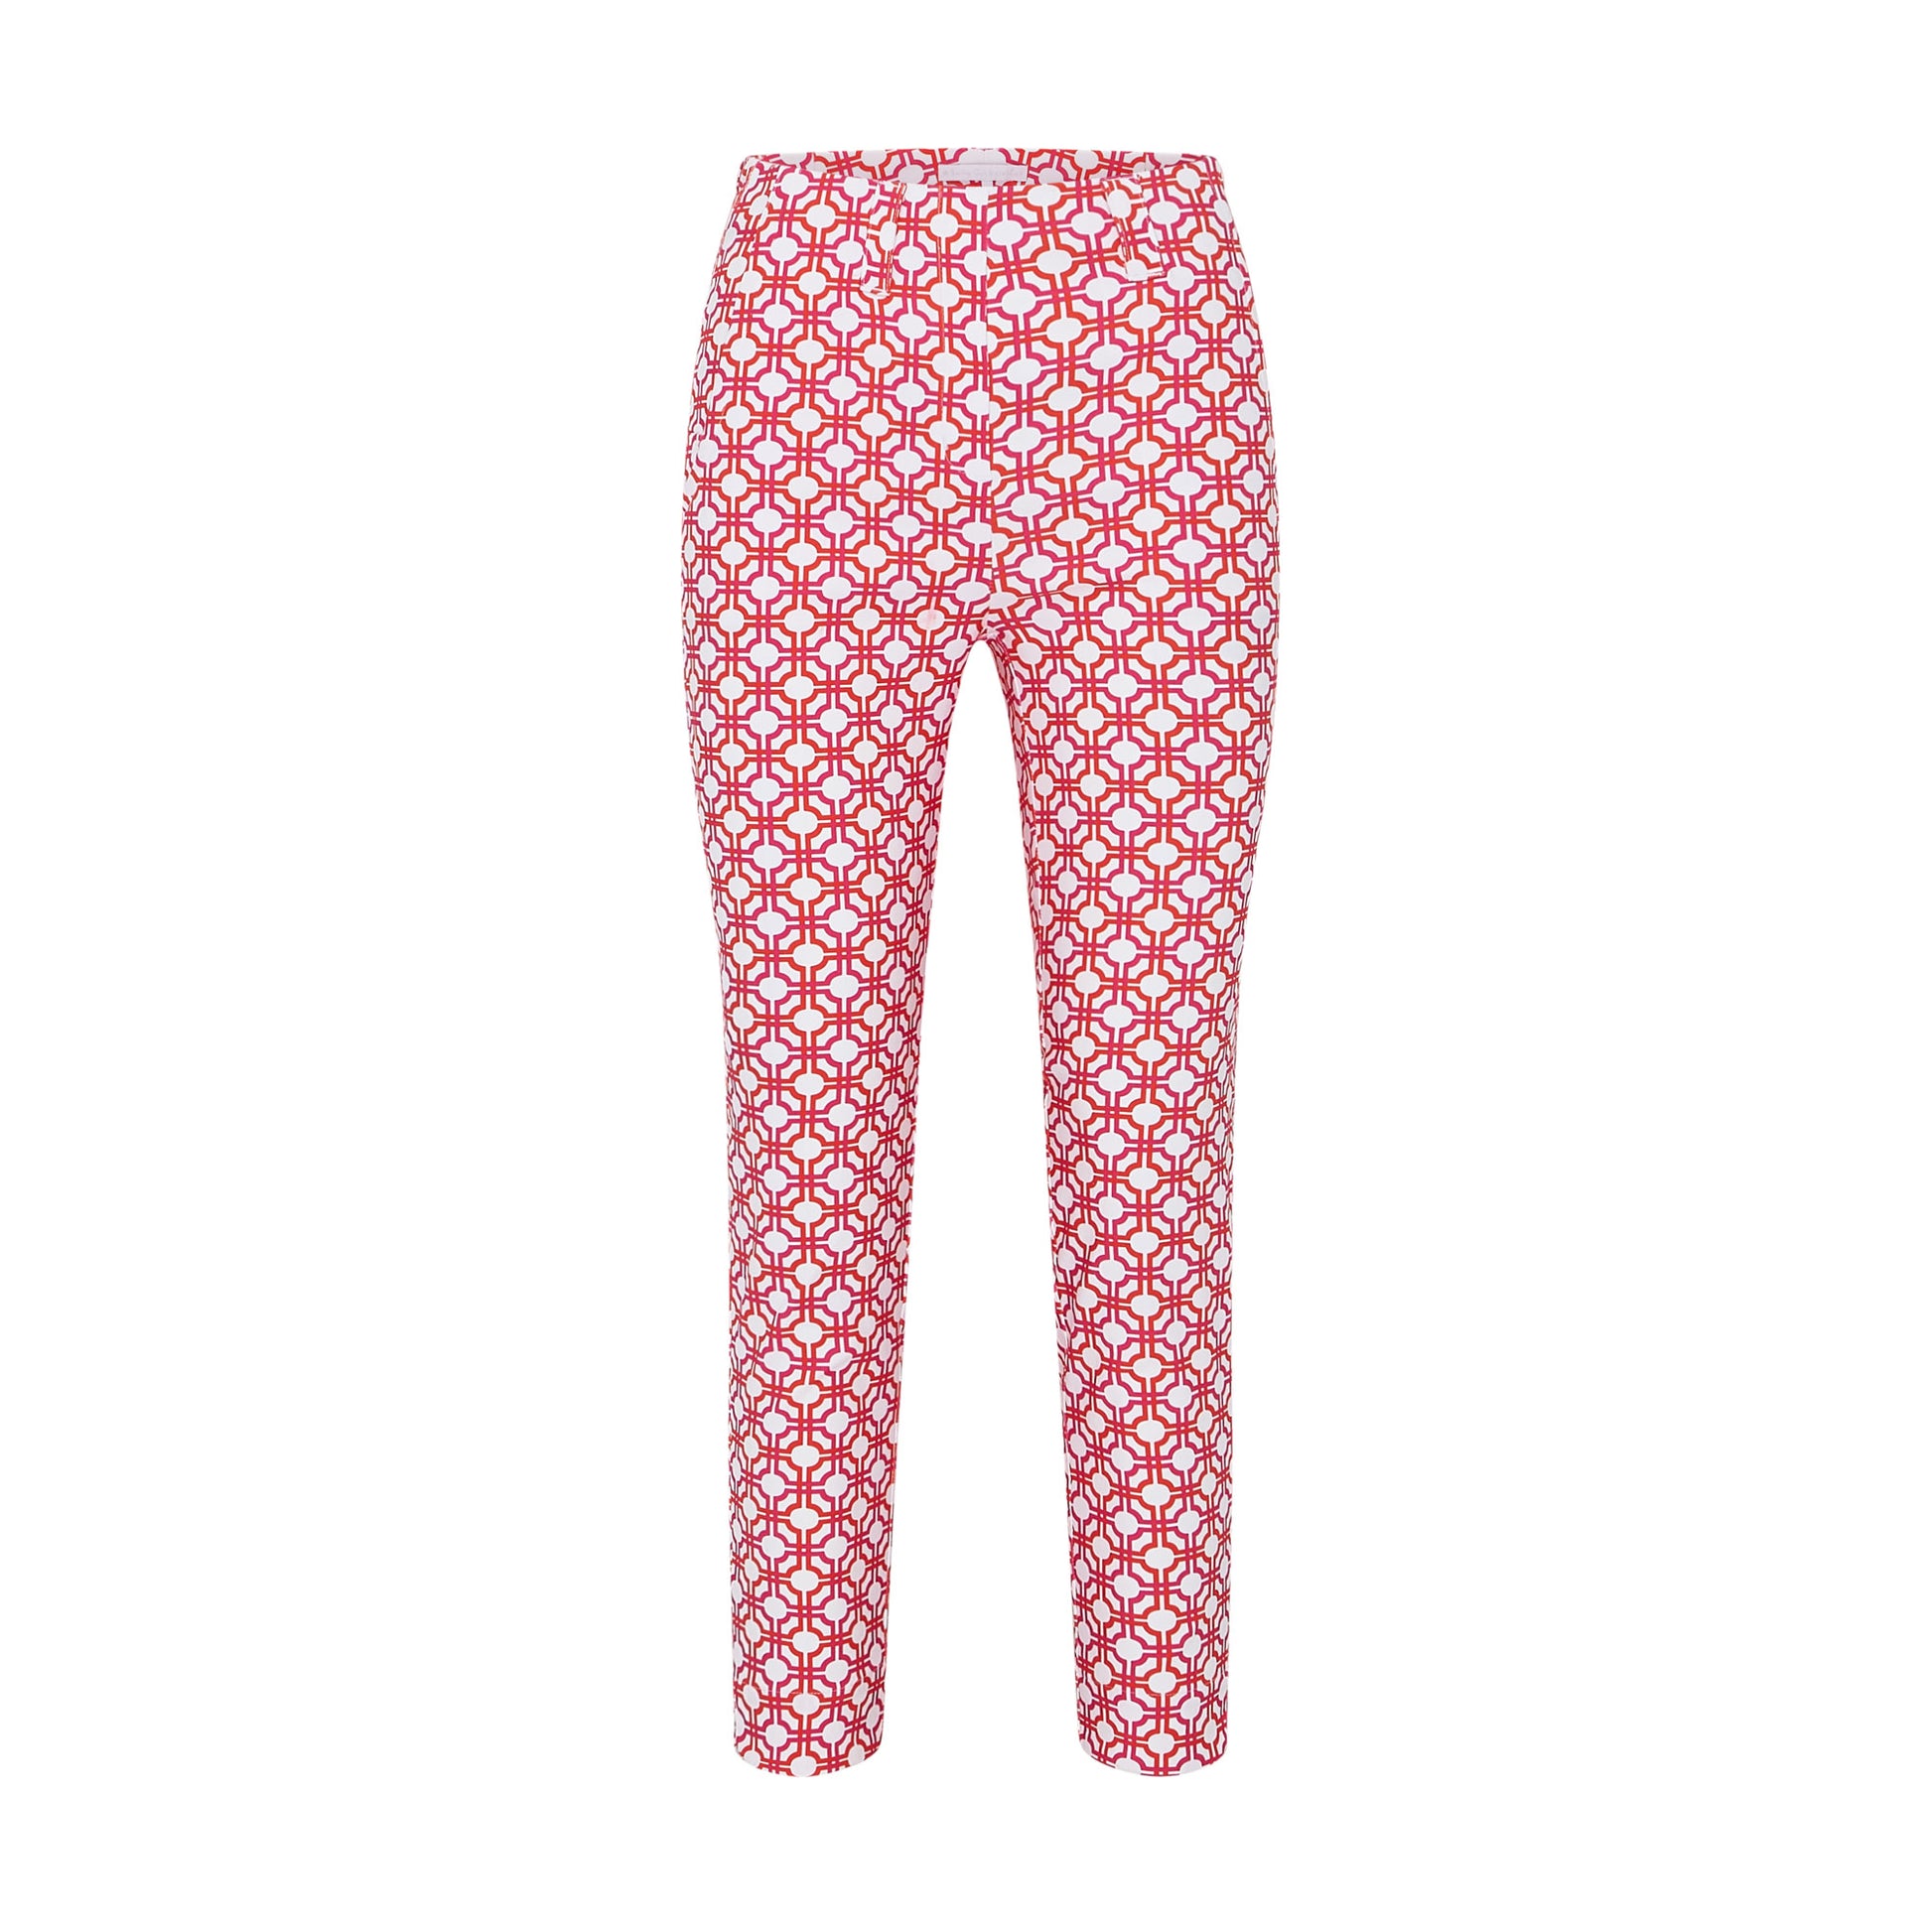 Swing Out Sister Ladies Lush Pink and Mandarin Mosaic Pattern 7/8 Trousers